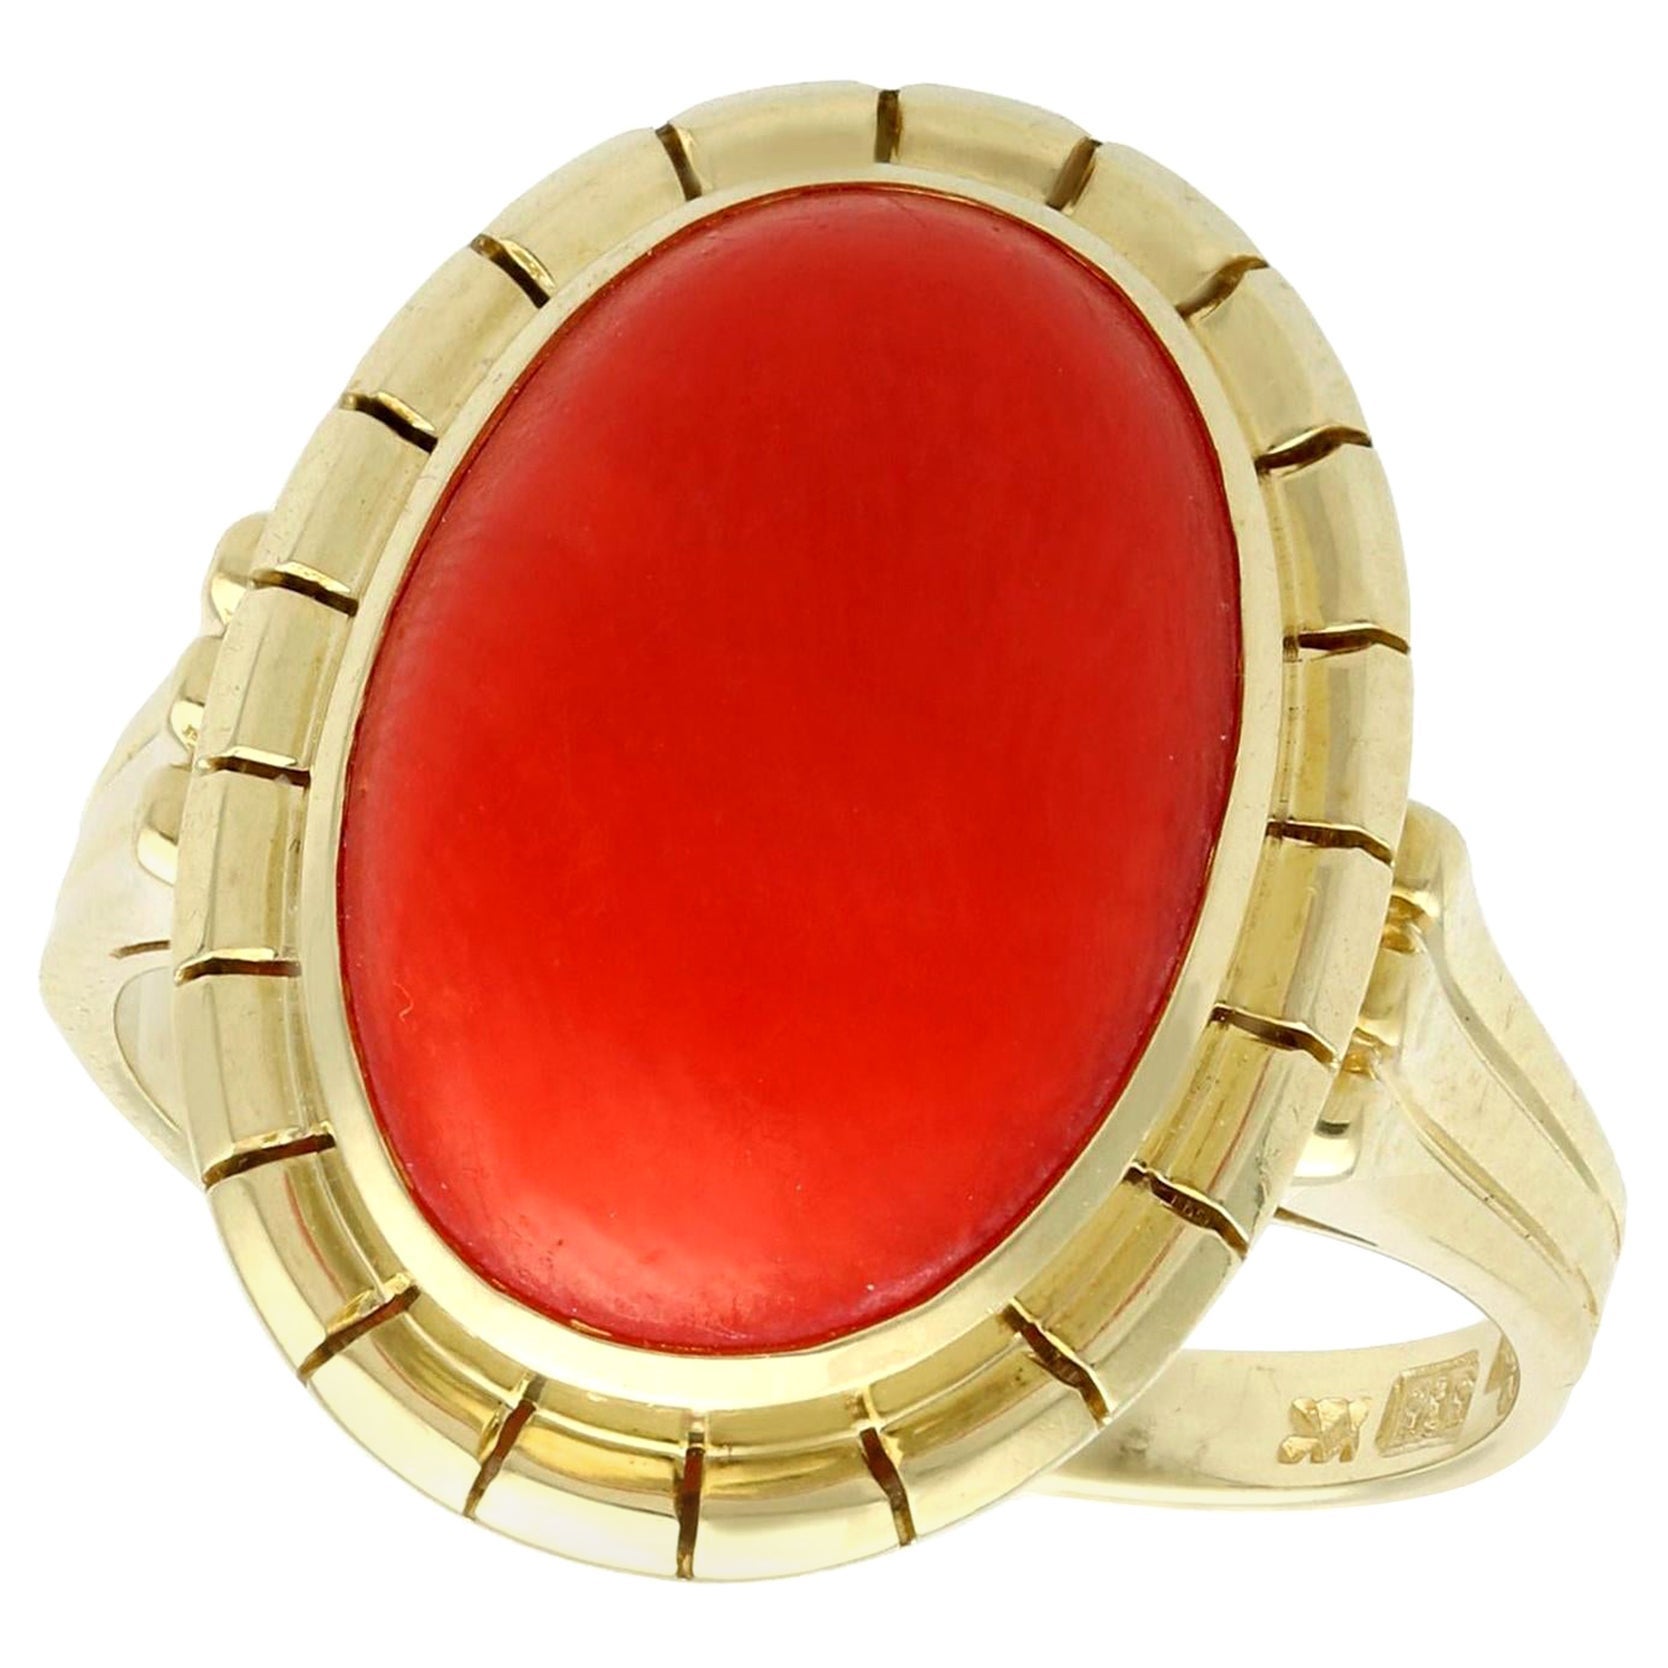 Vintage 1940s 4.84 Carat Cabochon Cut Coral and Yellow Gold Cocktail Ring